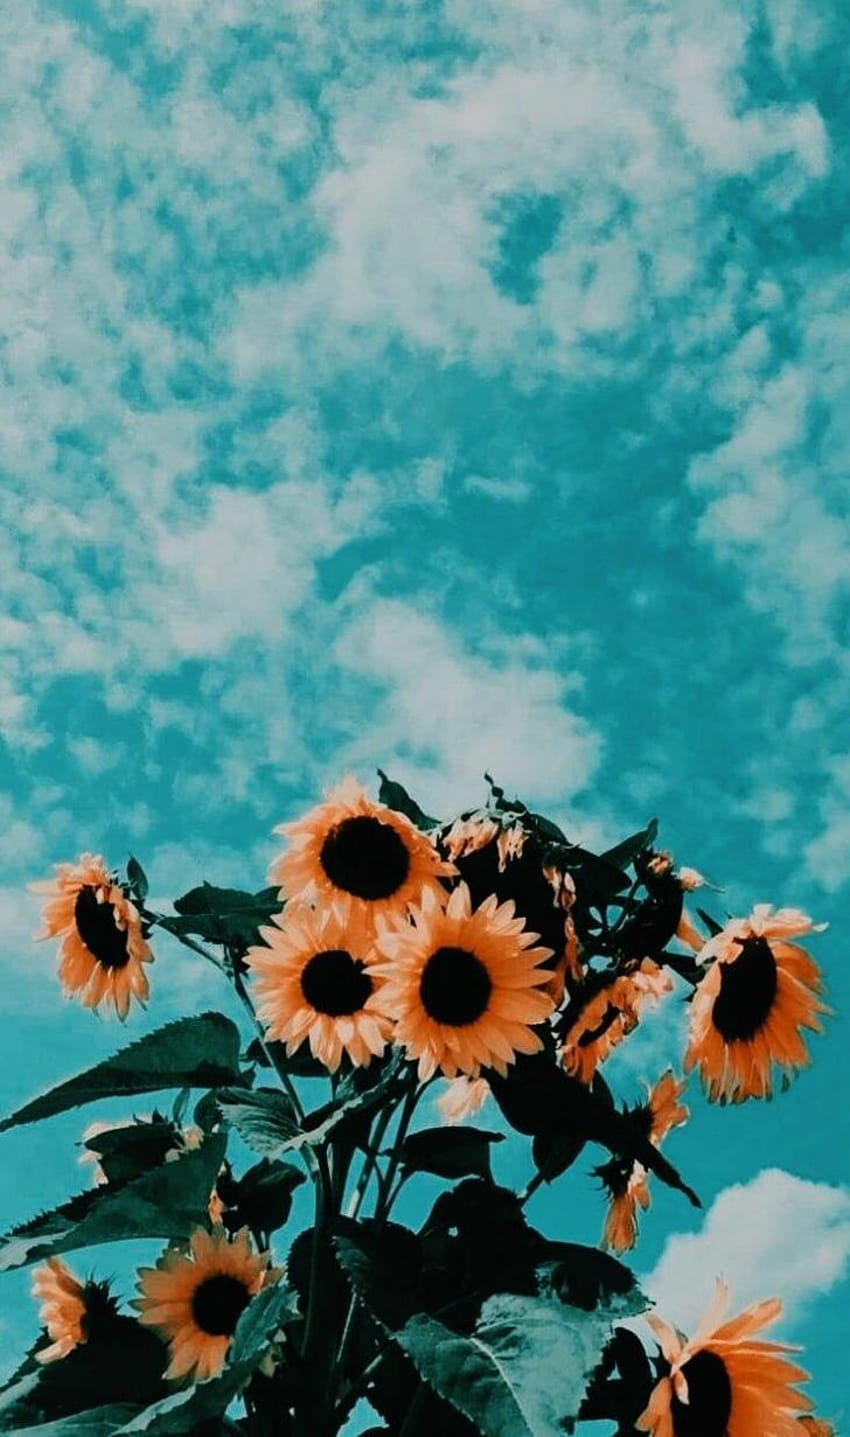 A sunflower plant with orange flowers against the sky - Summer, teal